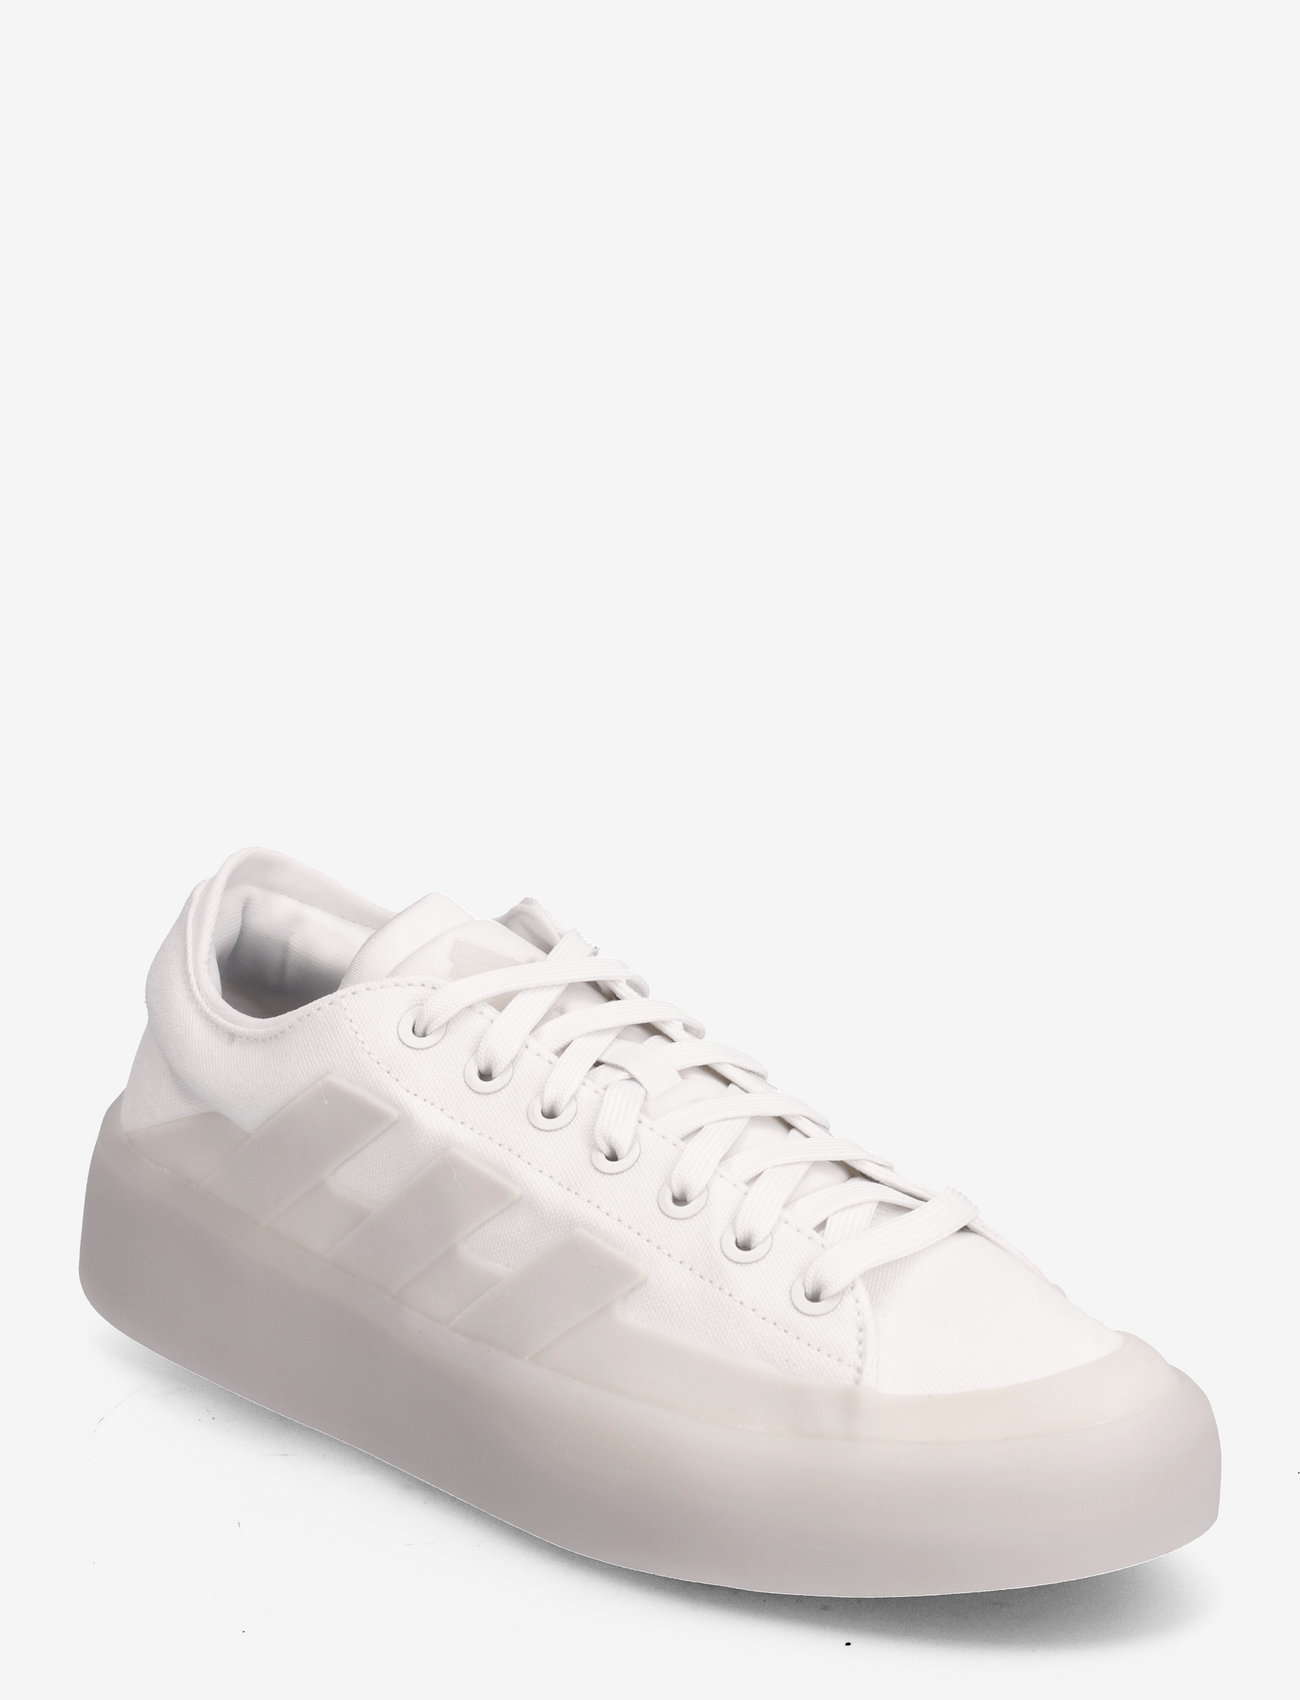 adidas Sportswear - ZNSORED Shoes - low top sneakers - crywht/ftwwht/ftwwht - 0